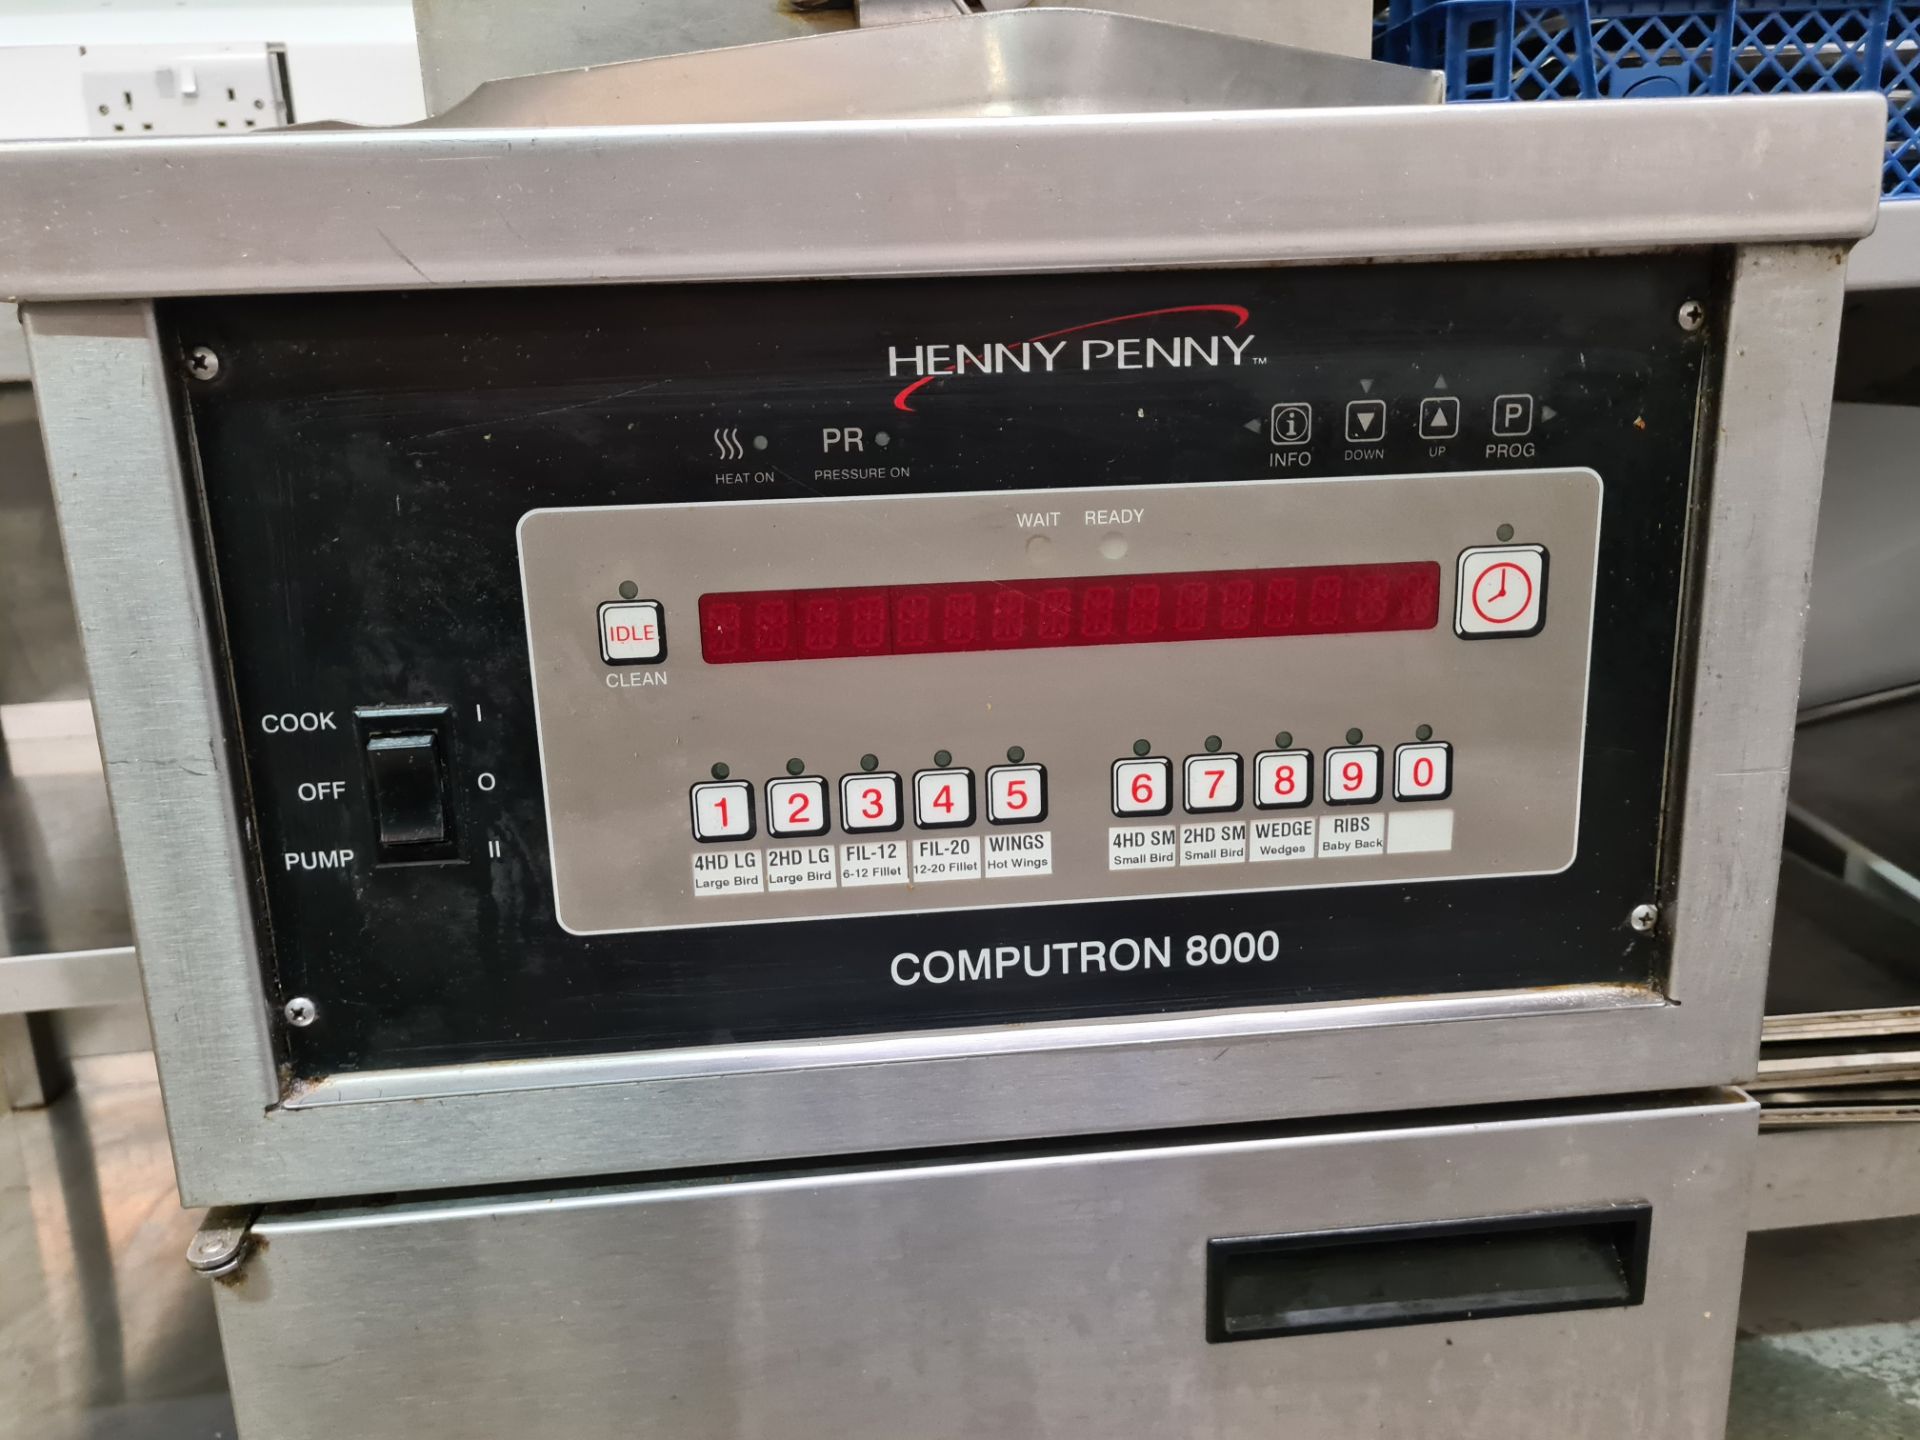 HENNY PENNY Computron 8000 Stainless Steel Pressure Cooking Fryer (240v) - Image 3 of 4